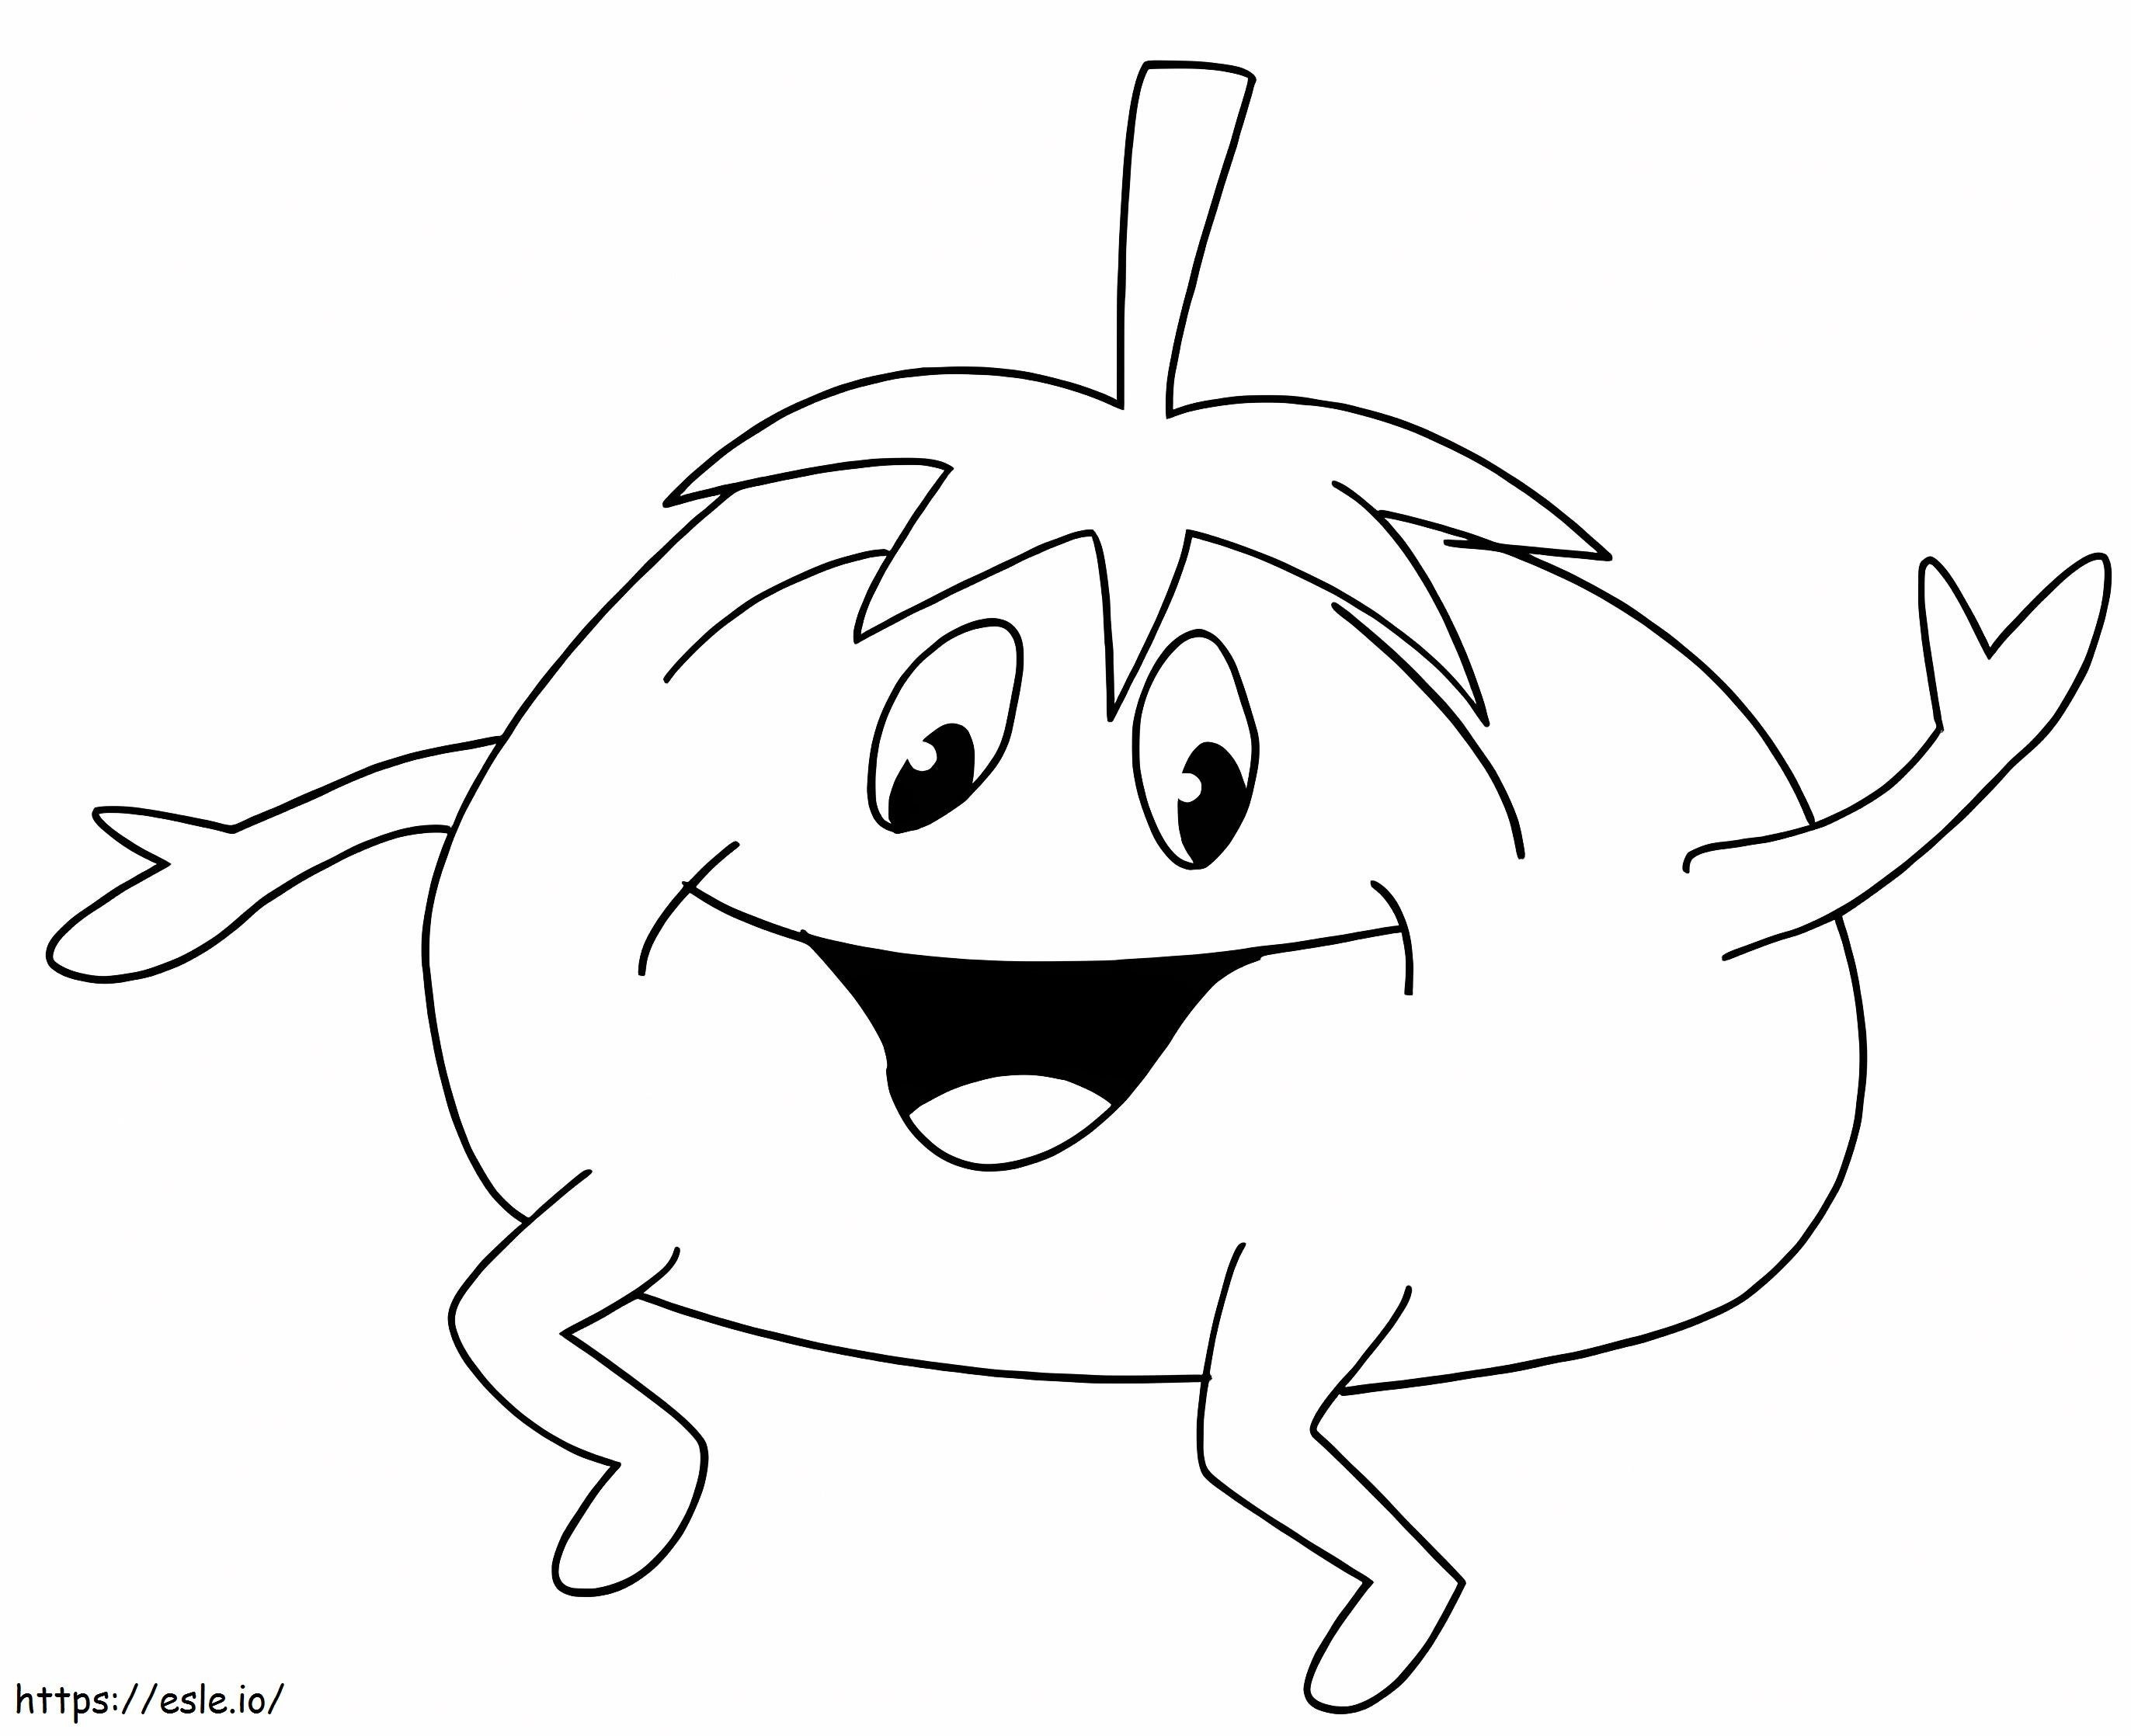 Funny Cartoon Tomato coloring page